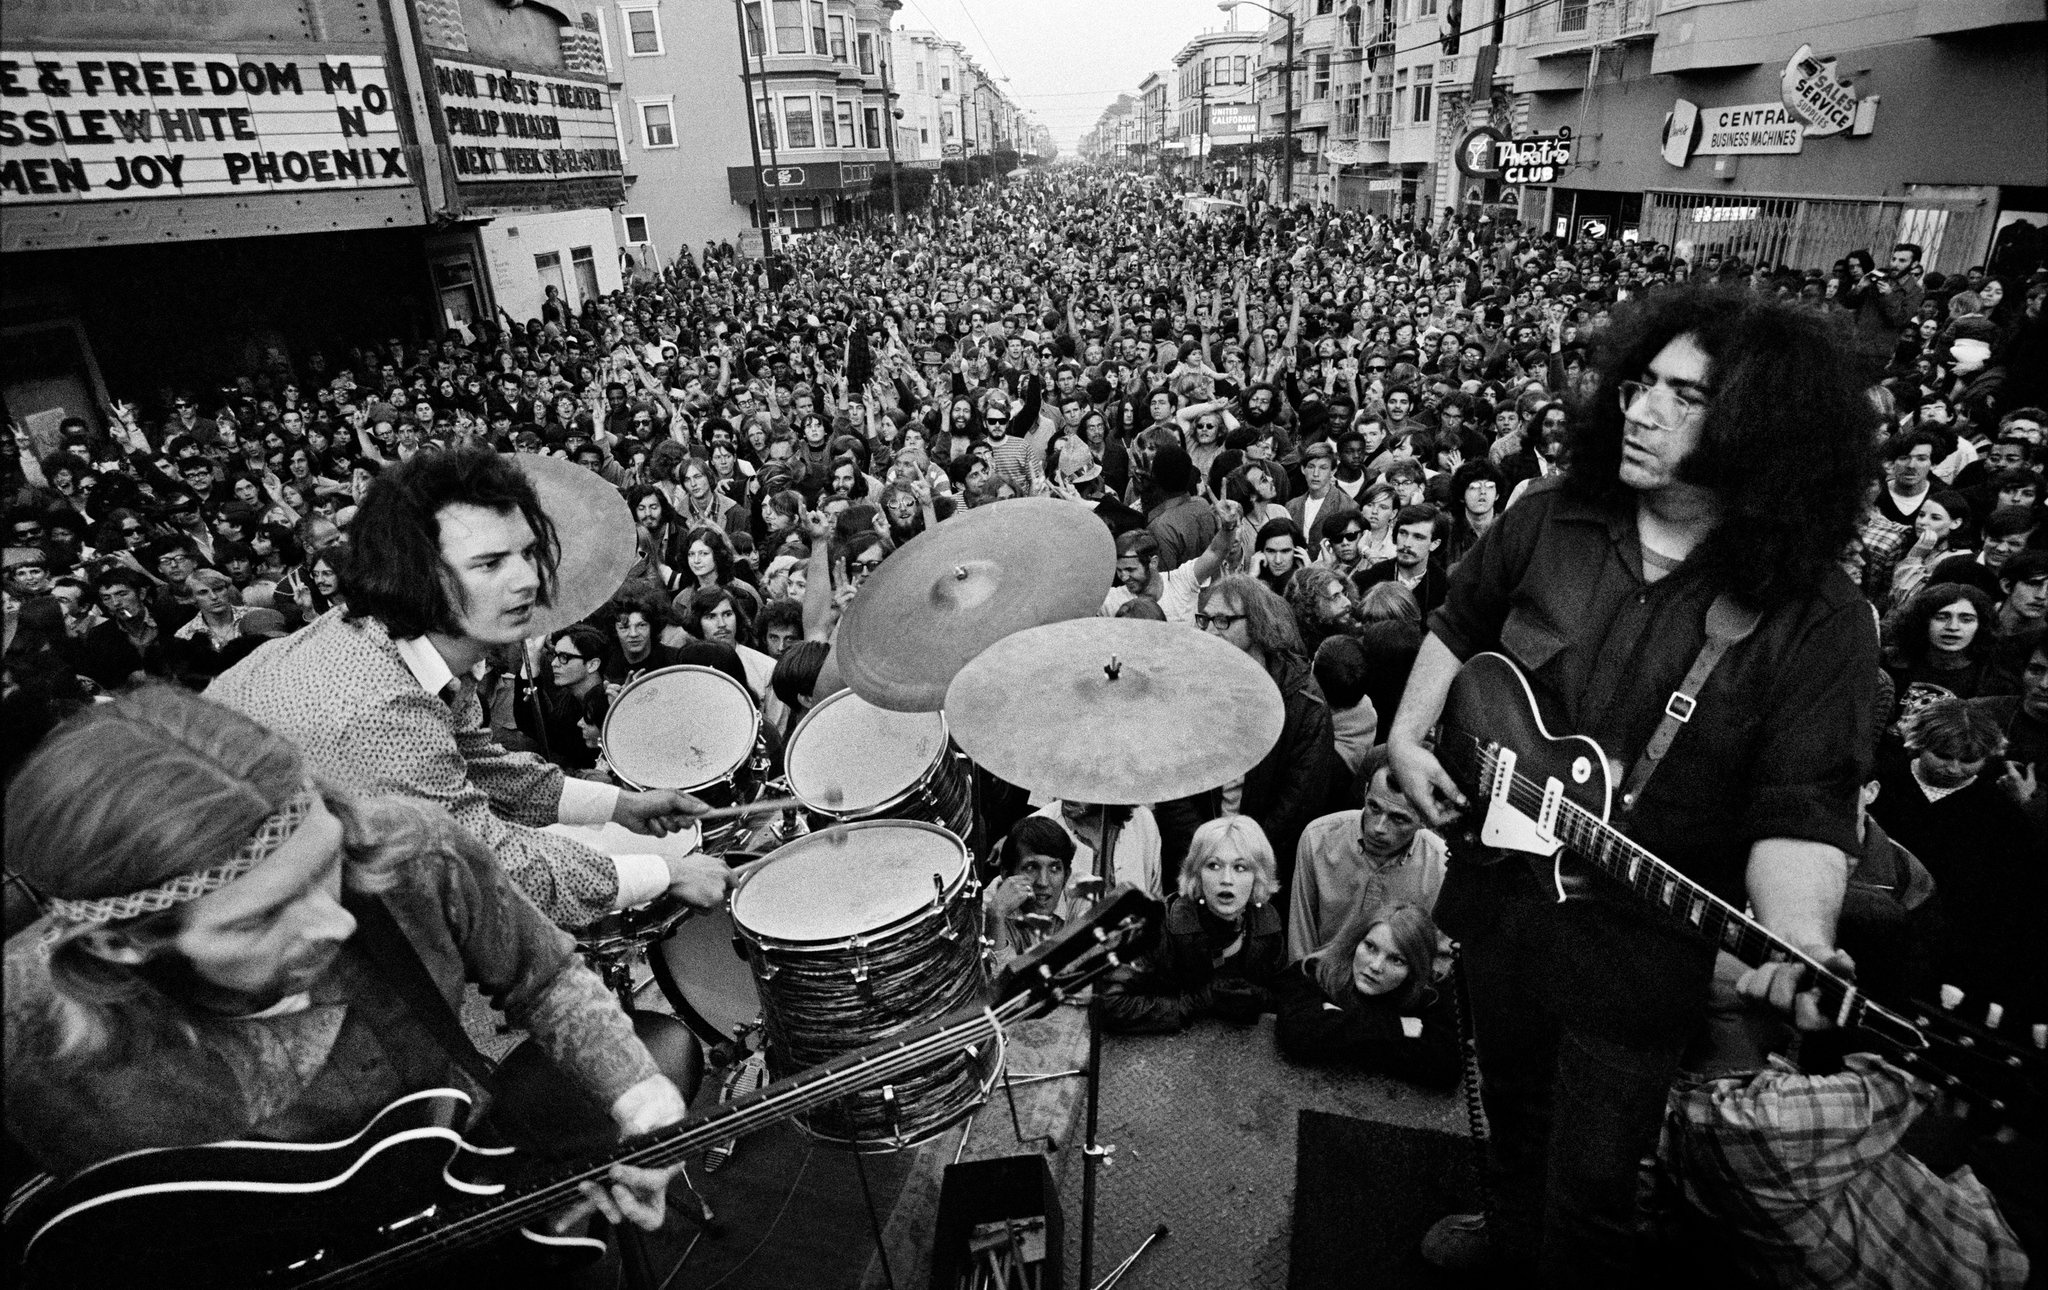 Grateful Dead: The pioneering jam band, Haight Street Fair, San Francisco, March 3, 1968, A committed fanbase. 2050x1290 HD Wallpaper.